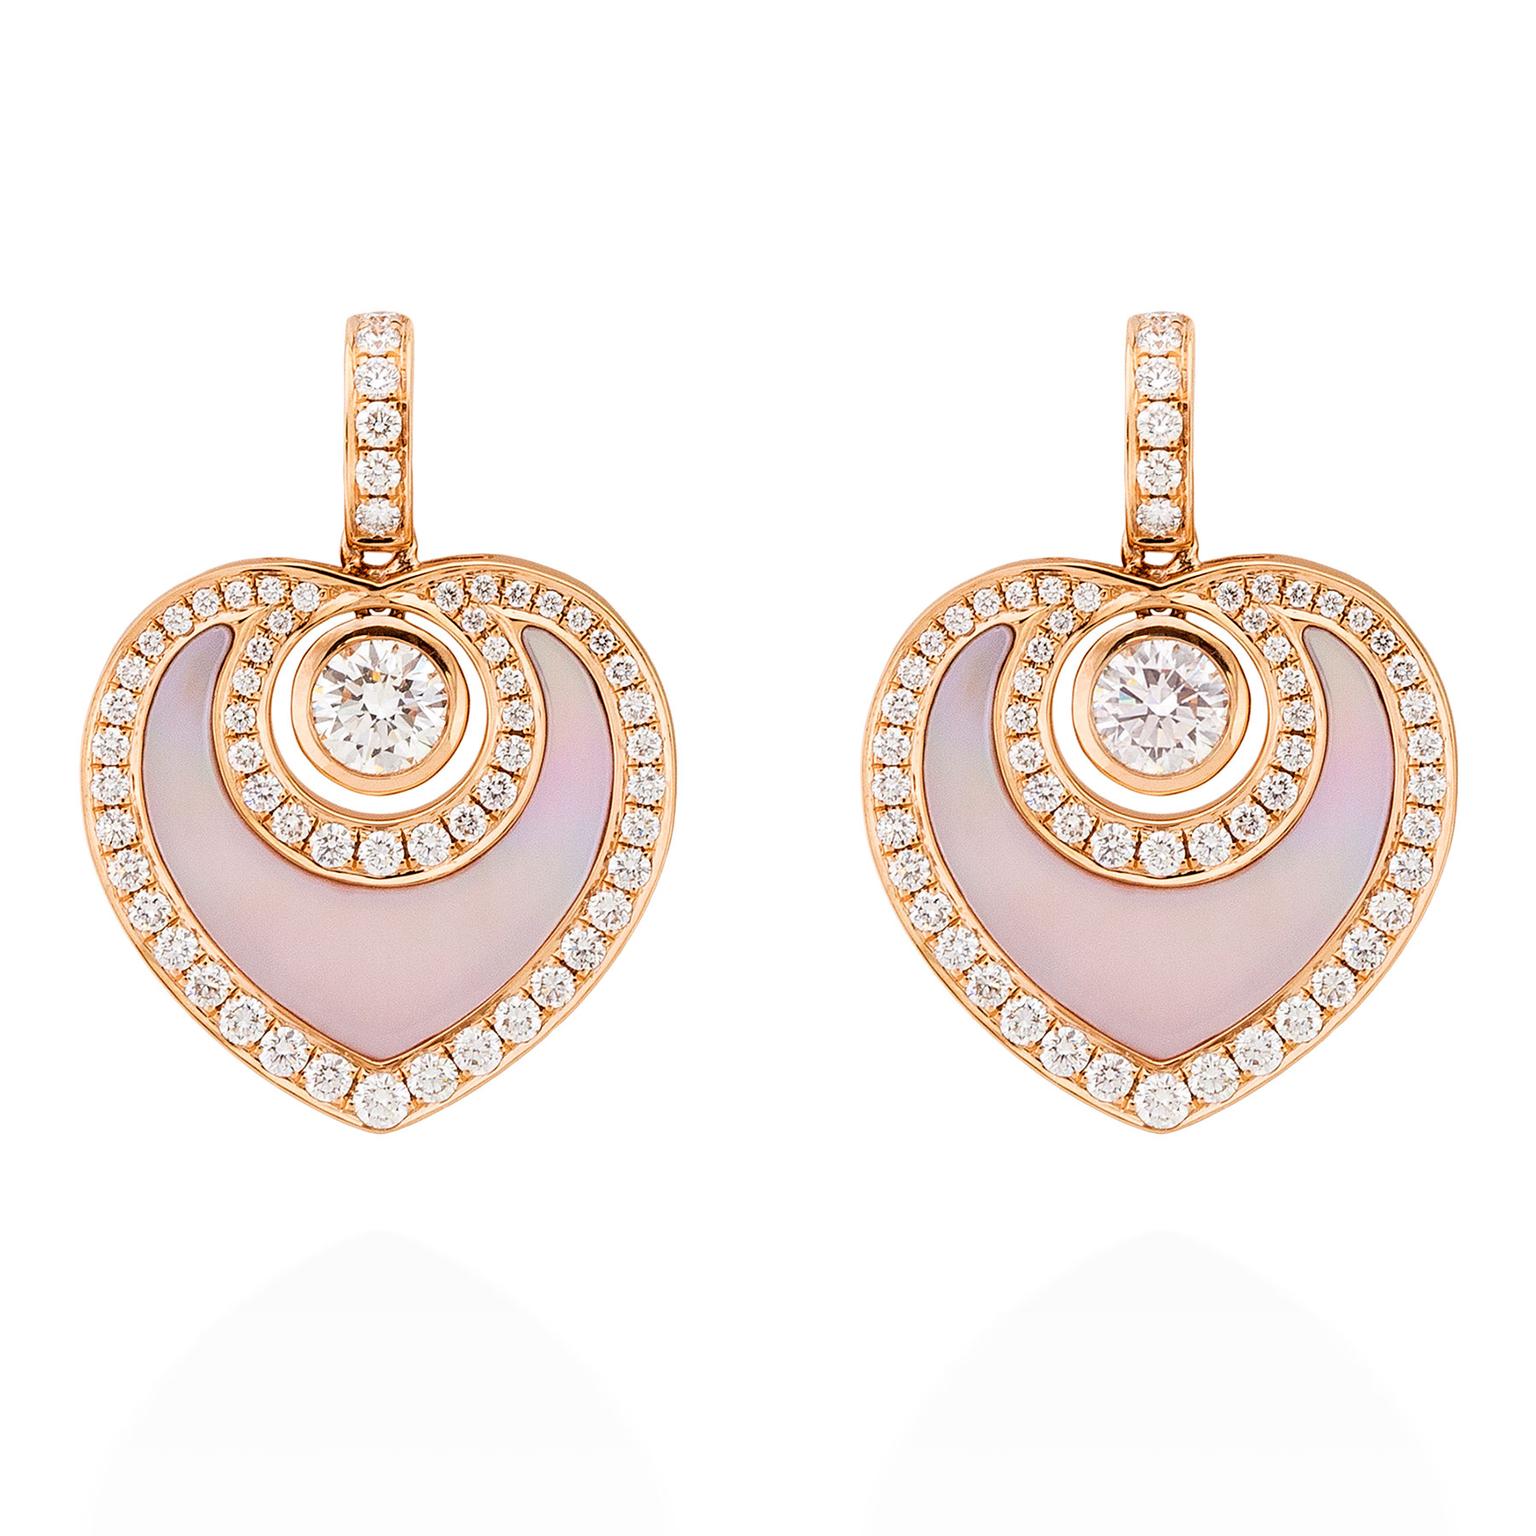 Boodles Sophie rose gold, diamond and mother-of-pearl earrings 